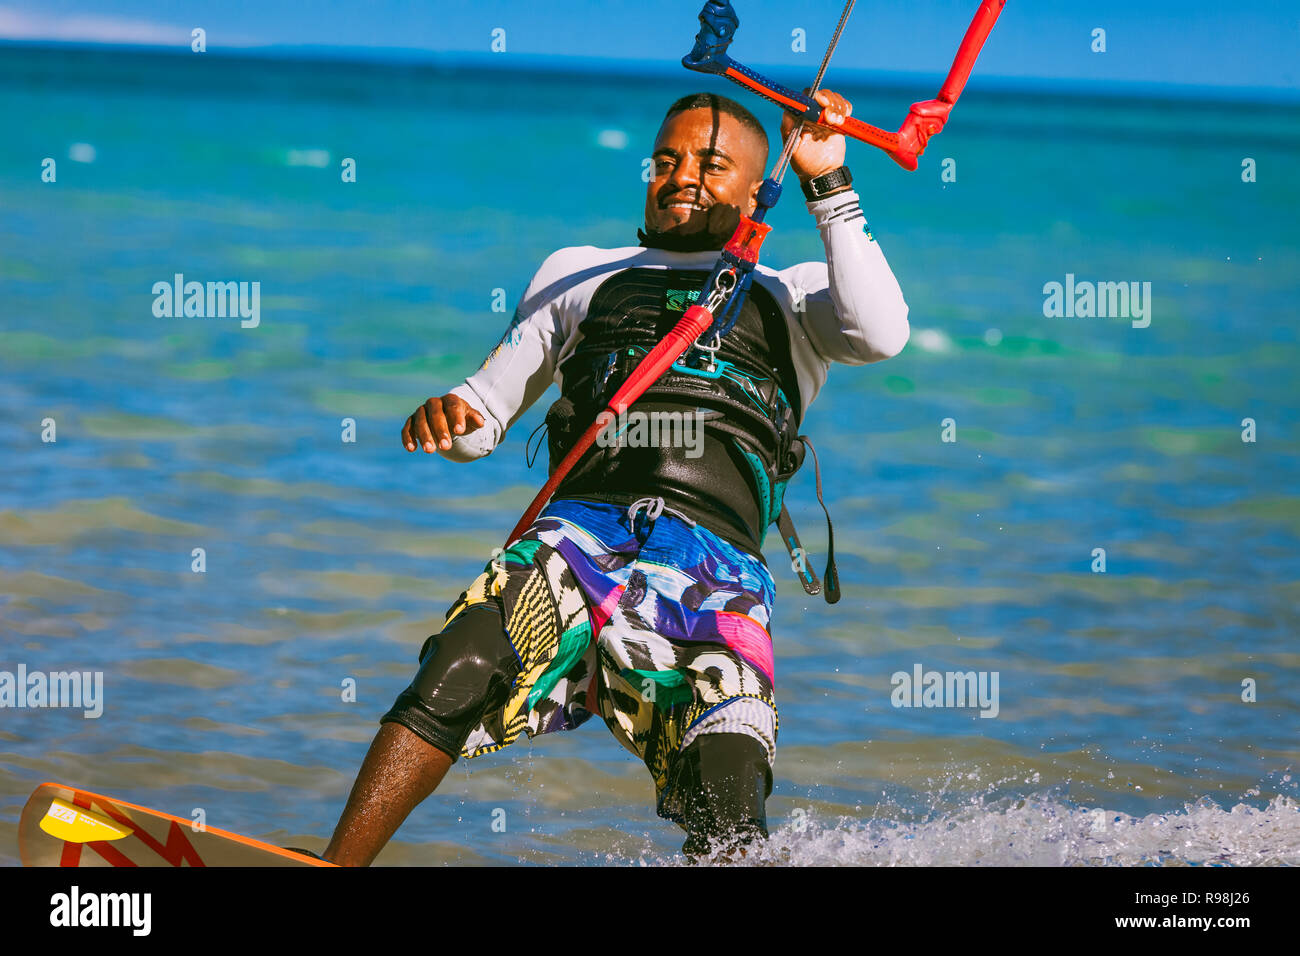 Egypt, Hurghada - 30 November, 2017: Close-up kitesurfer on the surfboard holding the kite straps. Red sea background. The sportsman having fun and en Stock Photo